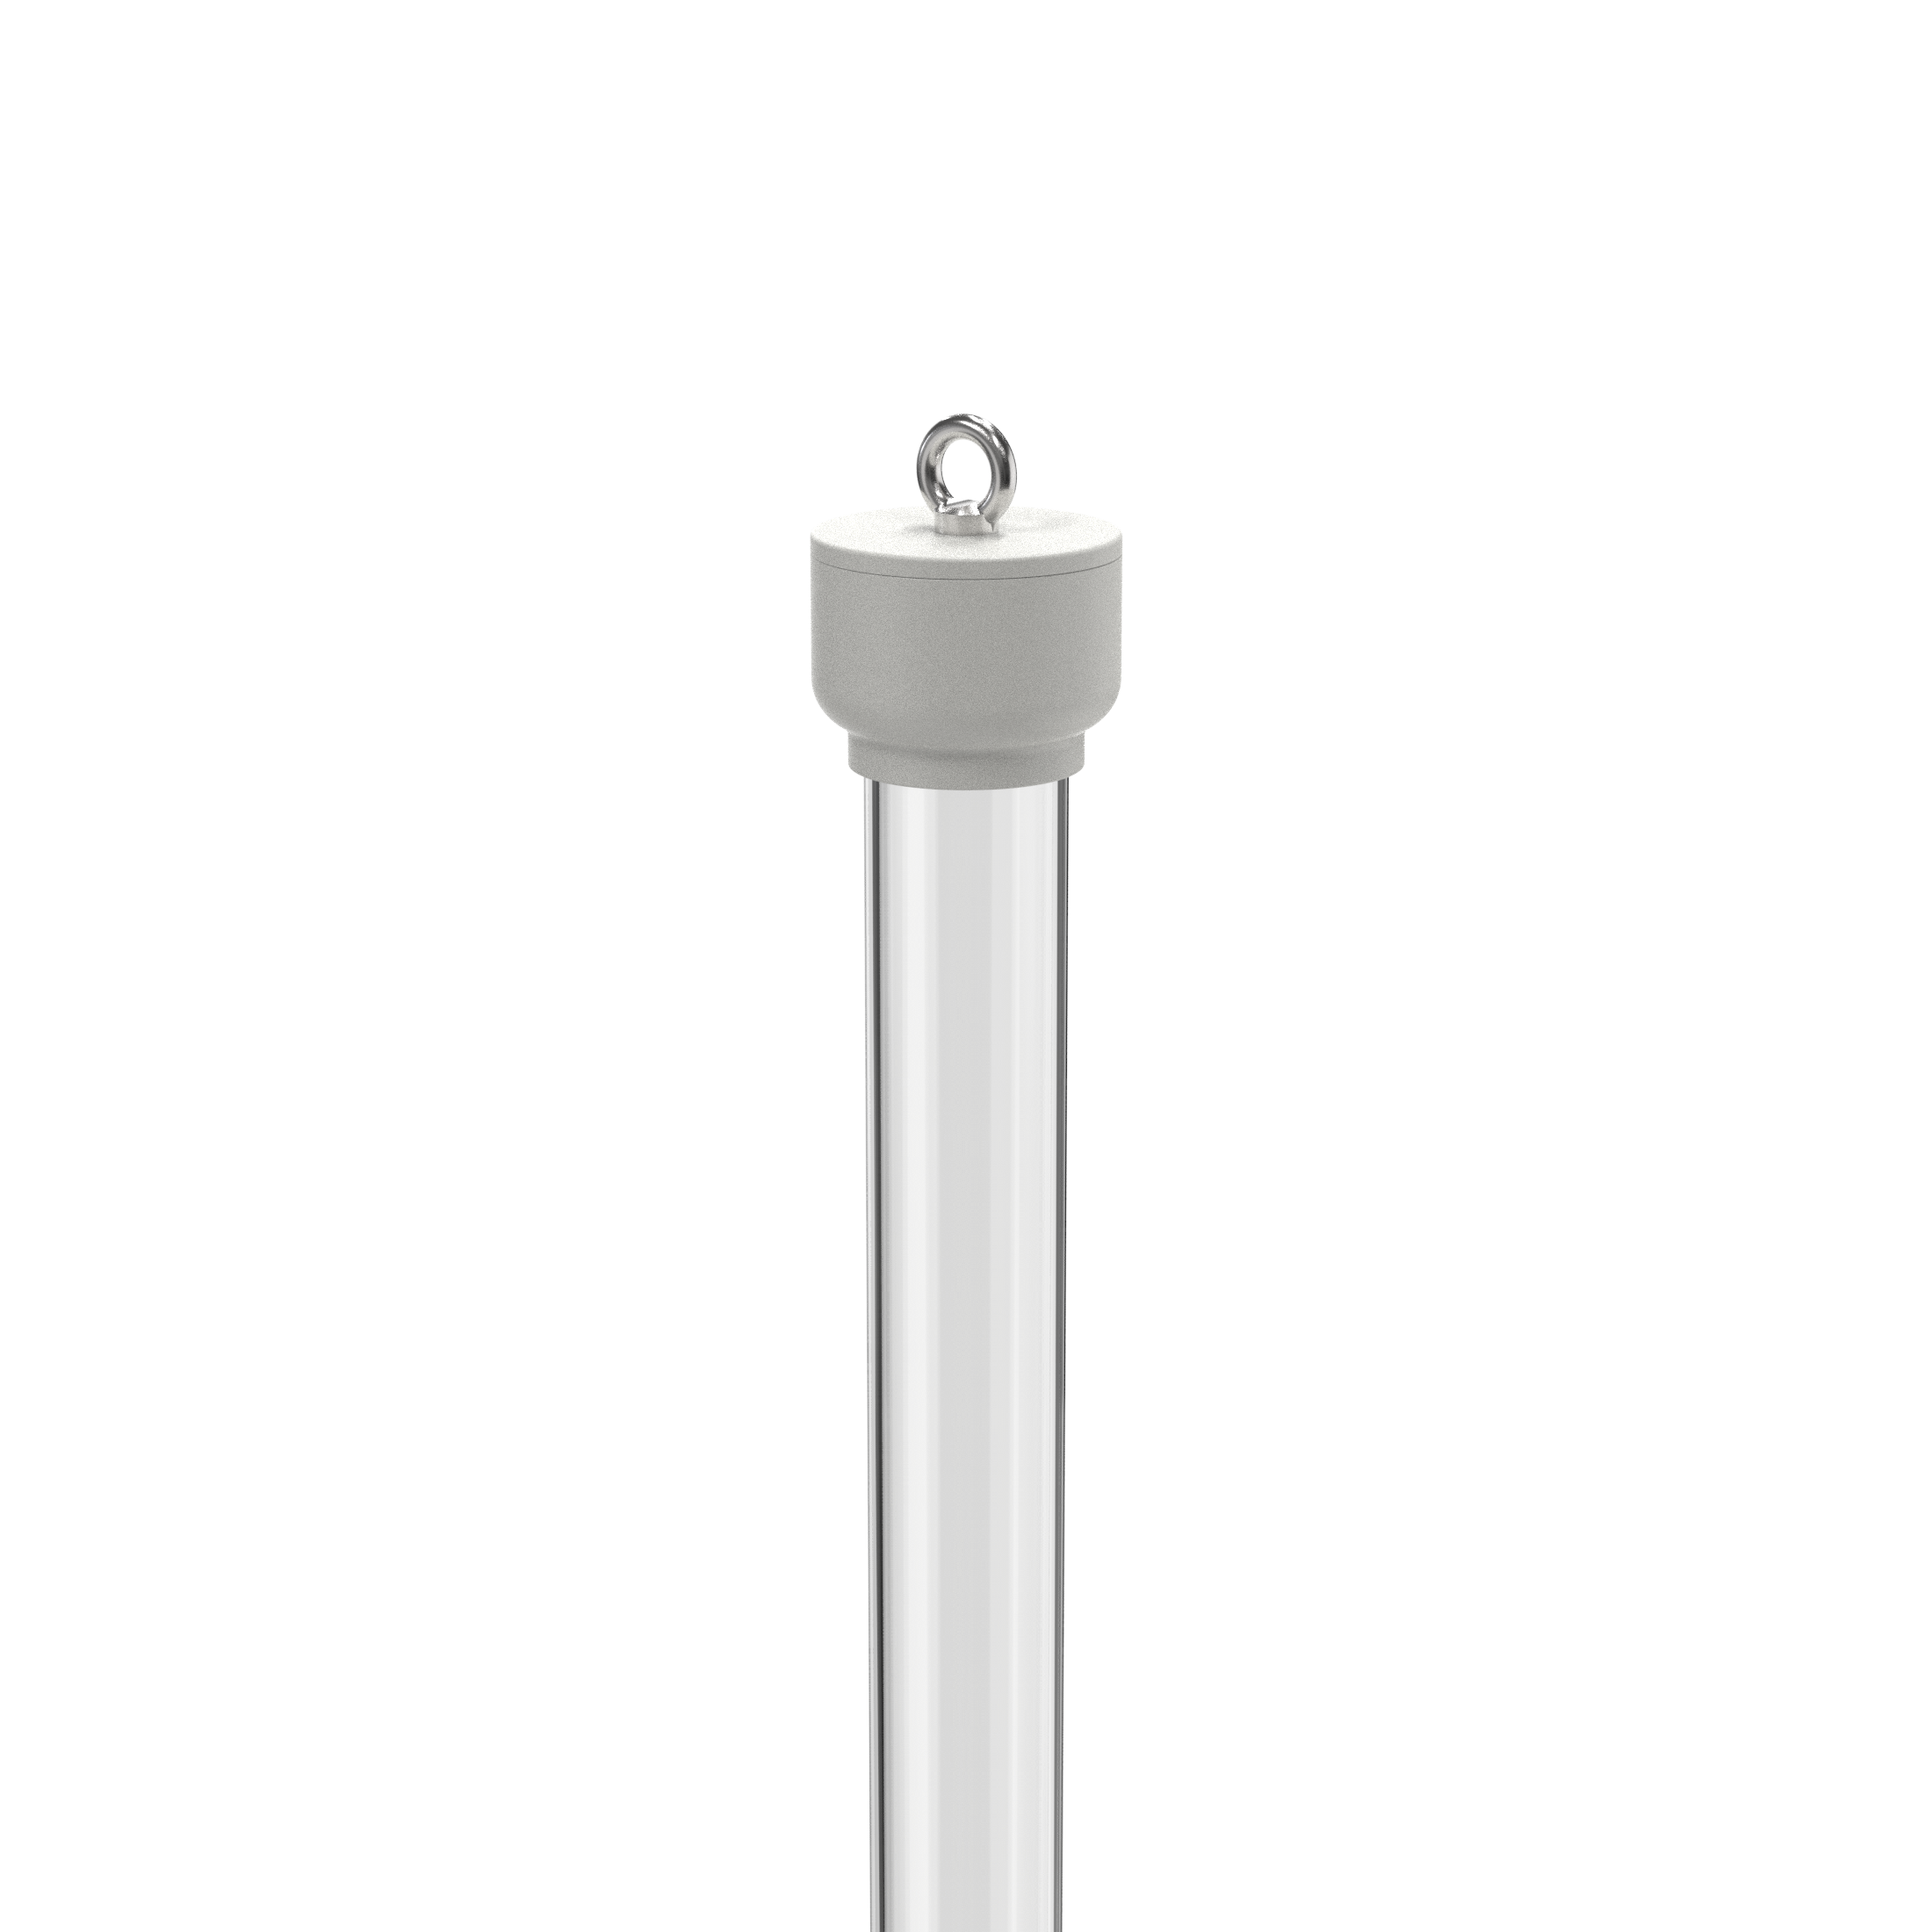 Immersion tube for TEE probe